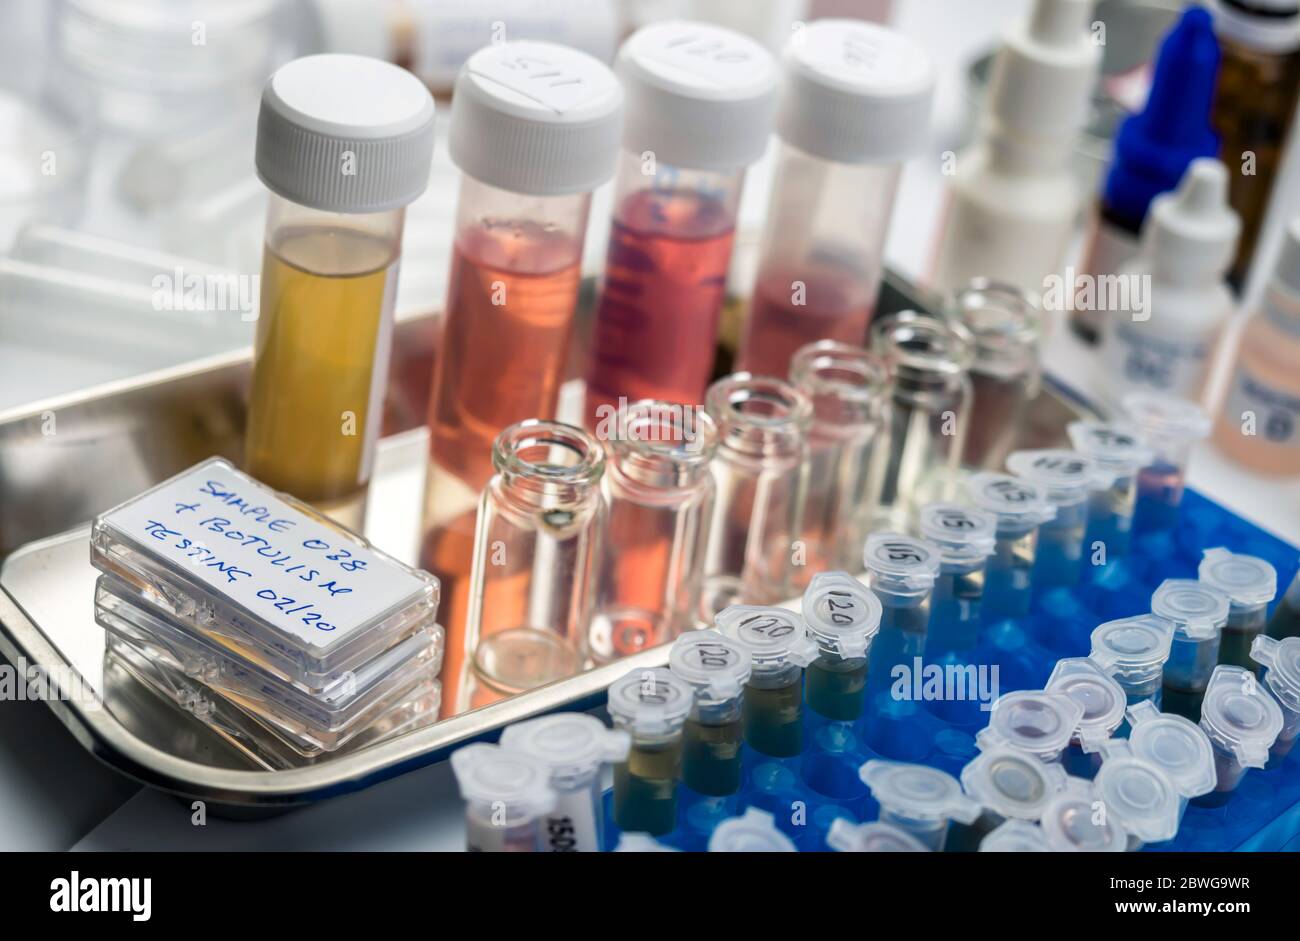 Samples contaminated by Clostridium botulinum toxin that causes botulism in humans, laboratory research, conceptual image Stock Photo